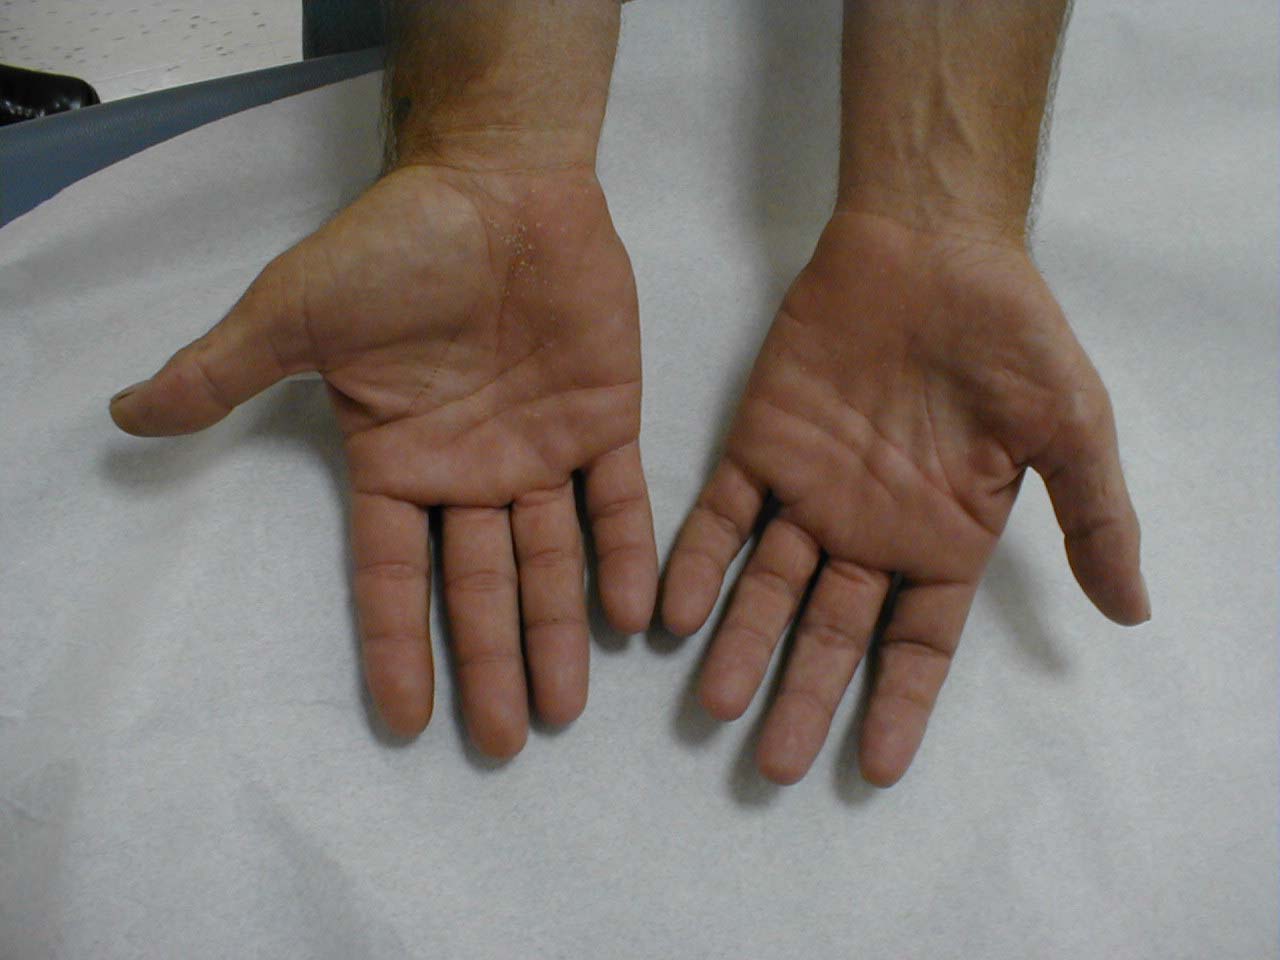 Muscle Wasting Left Hand: Atrophic flattening most prominently seen in the thenar and hypothenar muscles, resulting from generalized denervation.